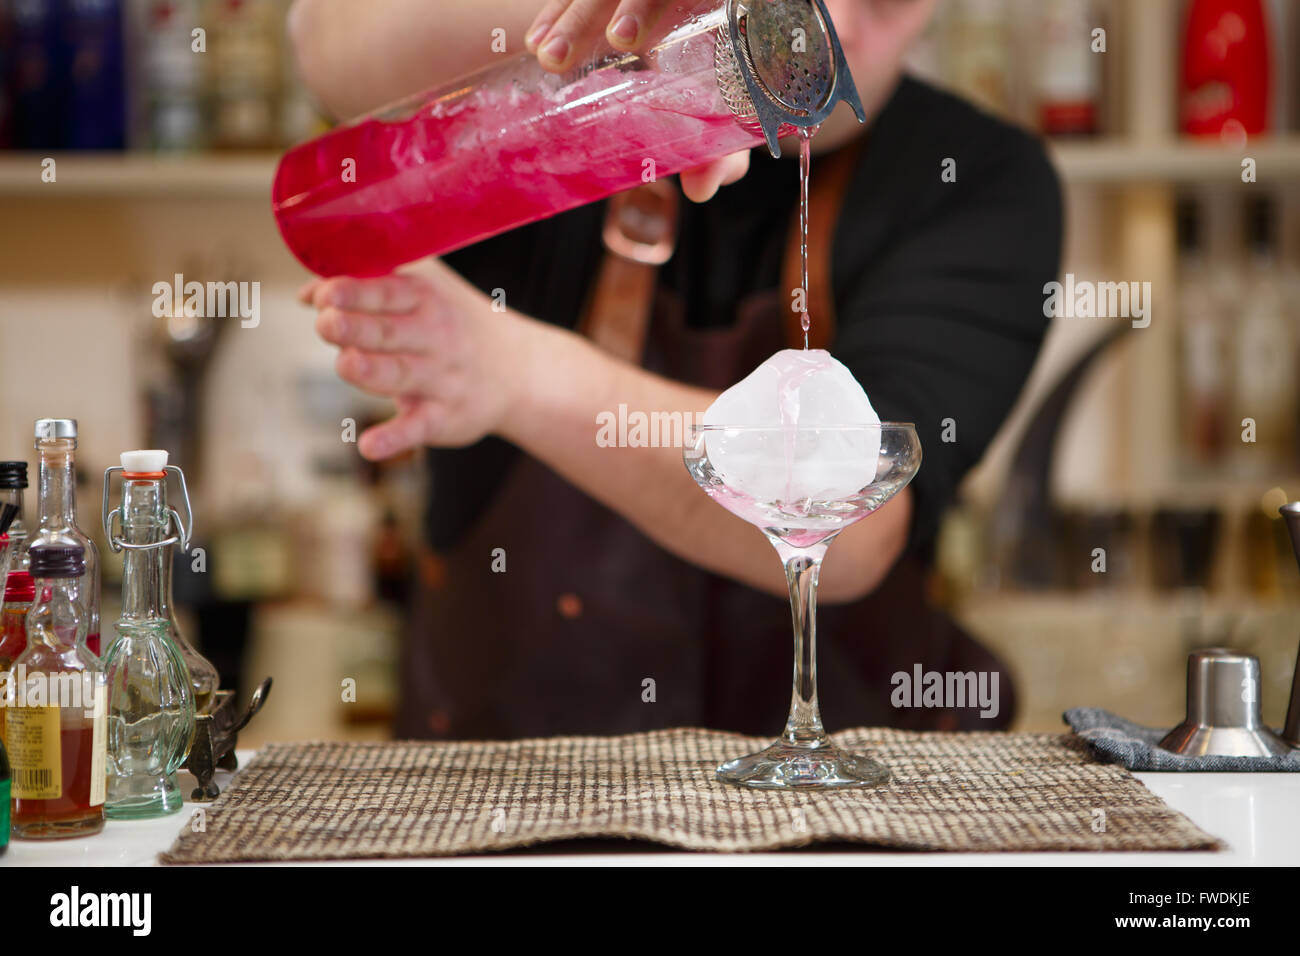 barman pouring a pink cocktail drink Stock Photo